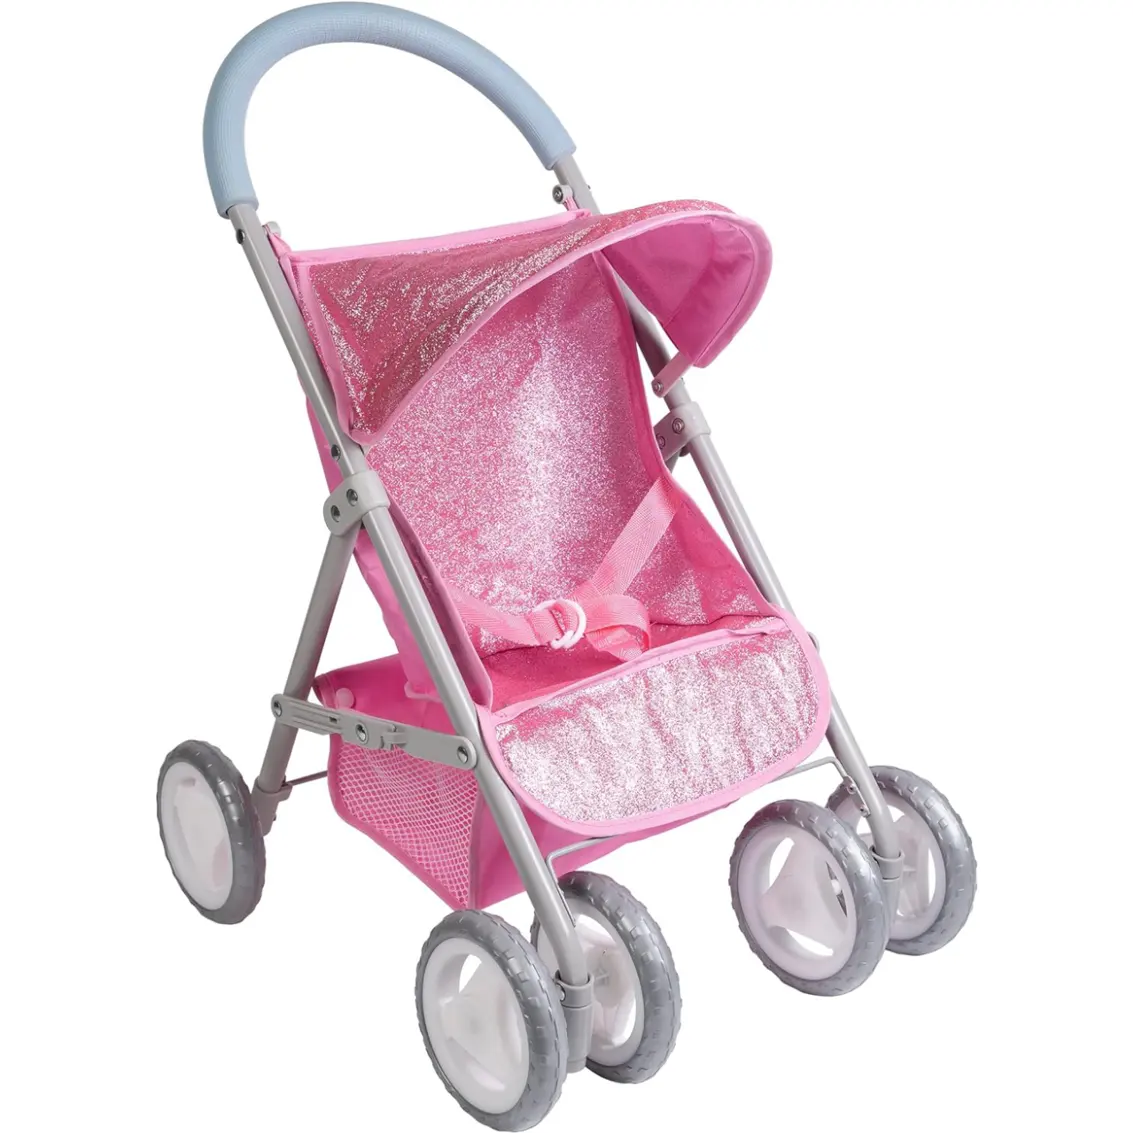 Wholesale Discounted Promotion Kids Children Toys Accessory Pink Sparkly Glittery Baby Doll Stroller Fits Dolls Up to 20 Inches